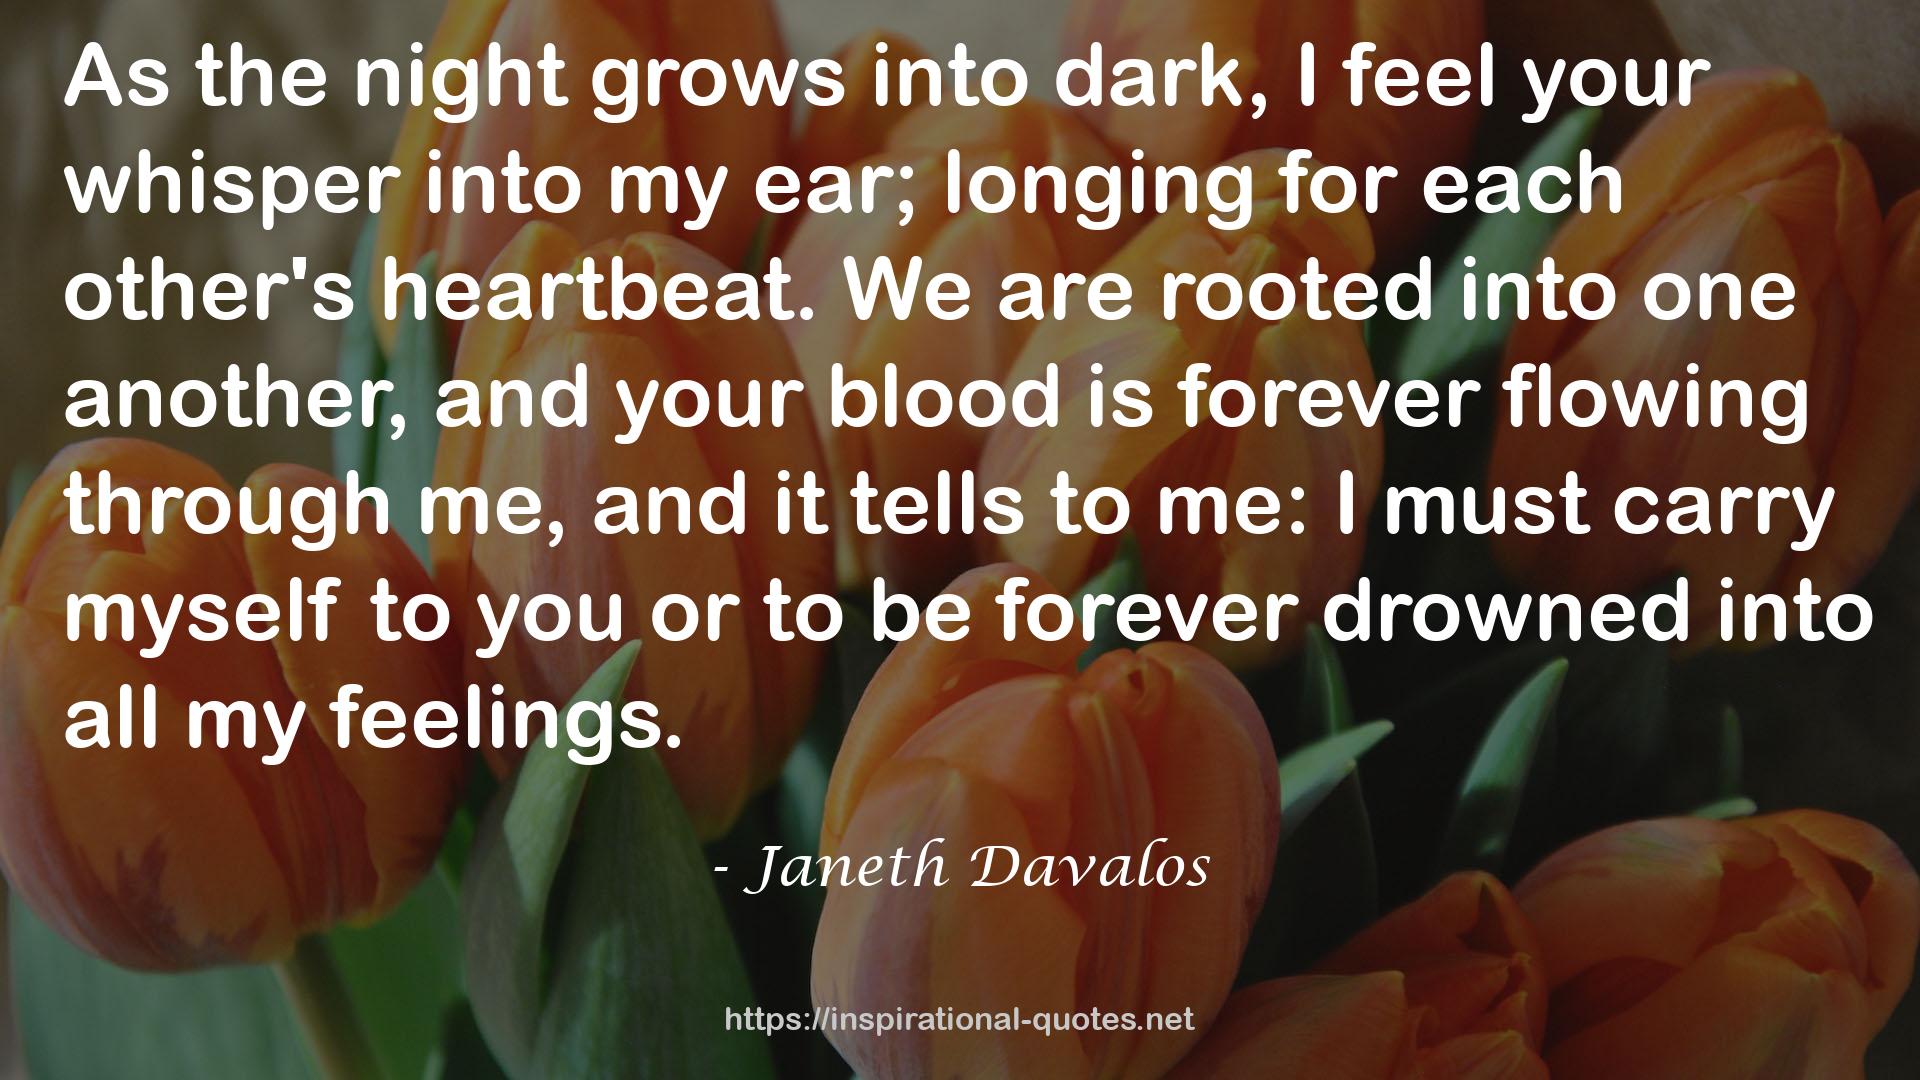 Janeth Davalos QUOTES